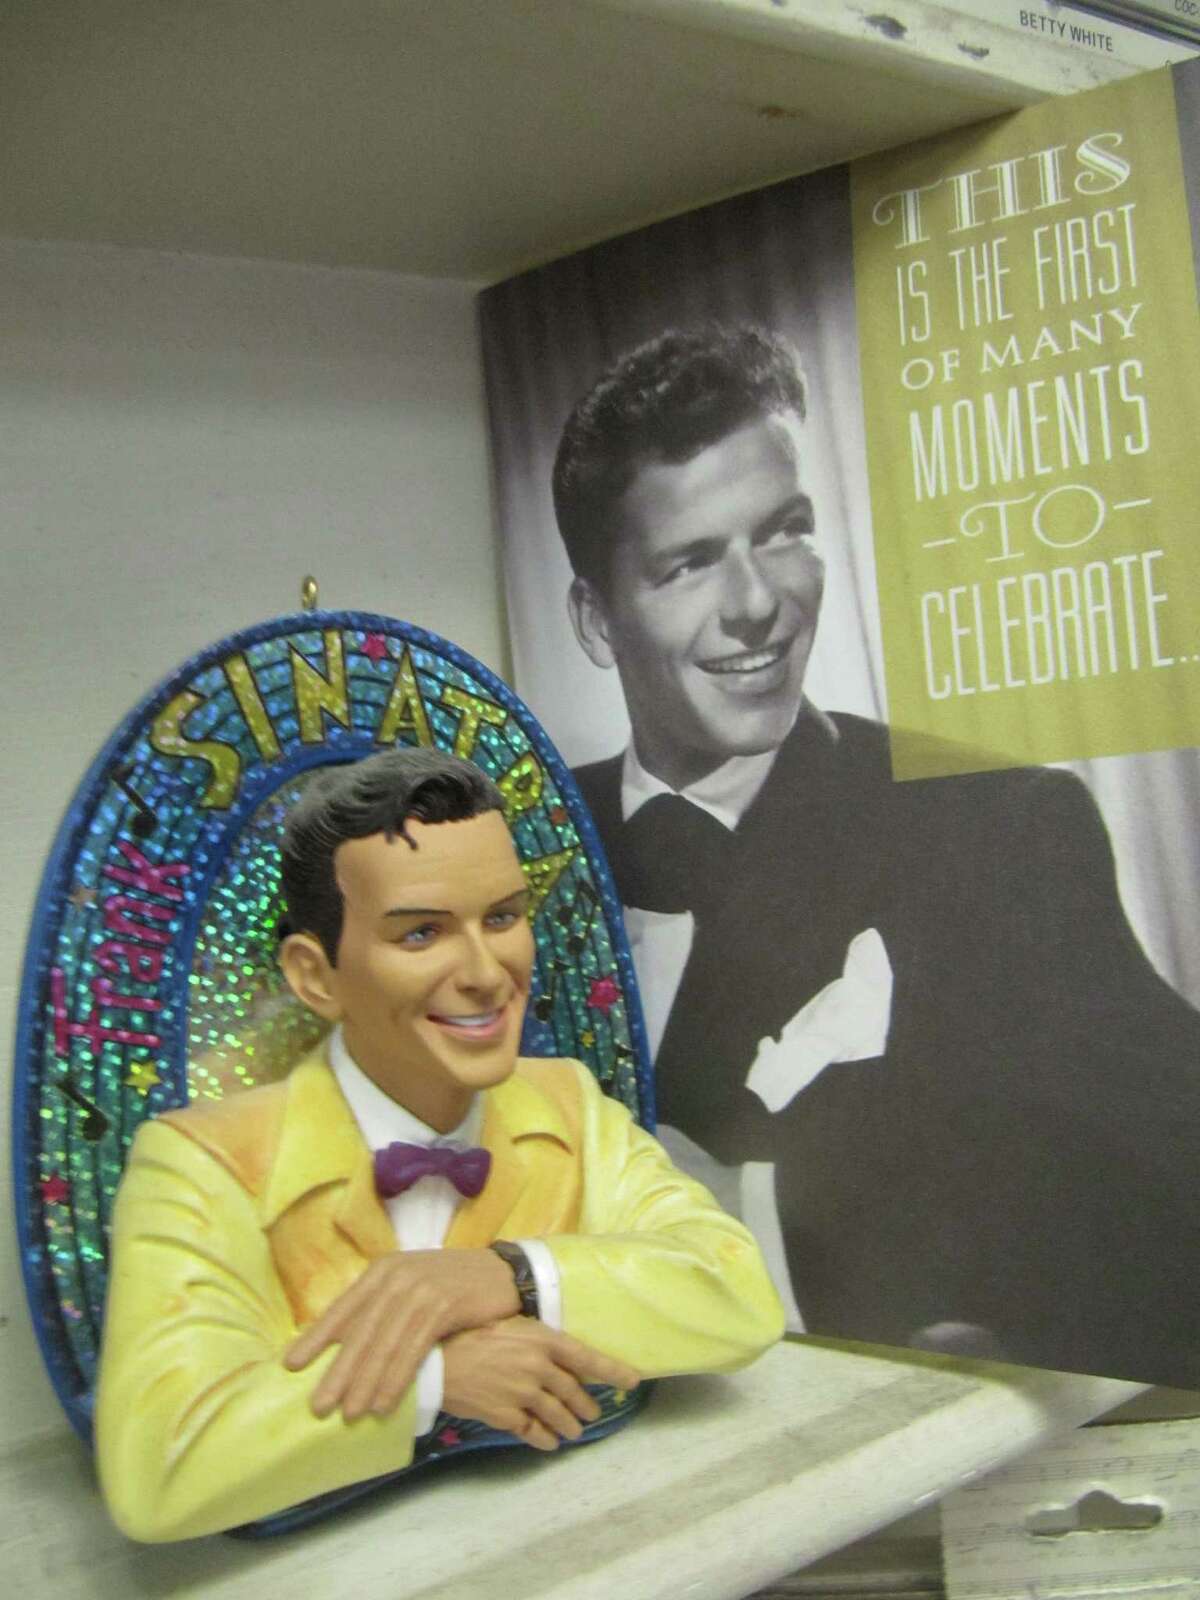 Frank Sinatra is Sally White's favorite singer, and Old Blue Eyes memorabilia has adorned her shop.